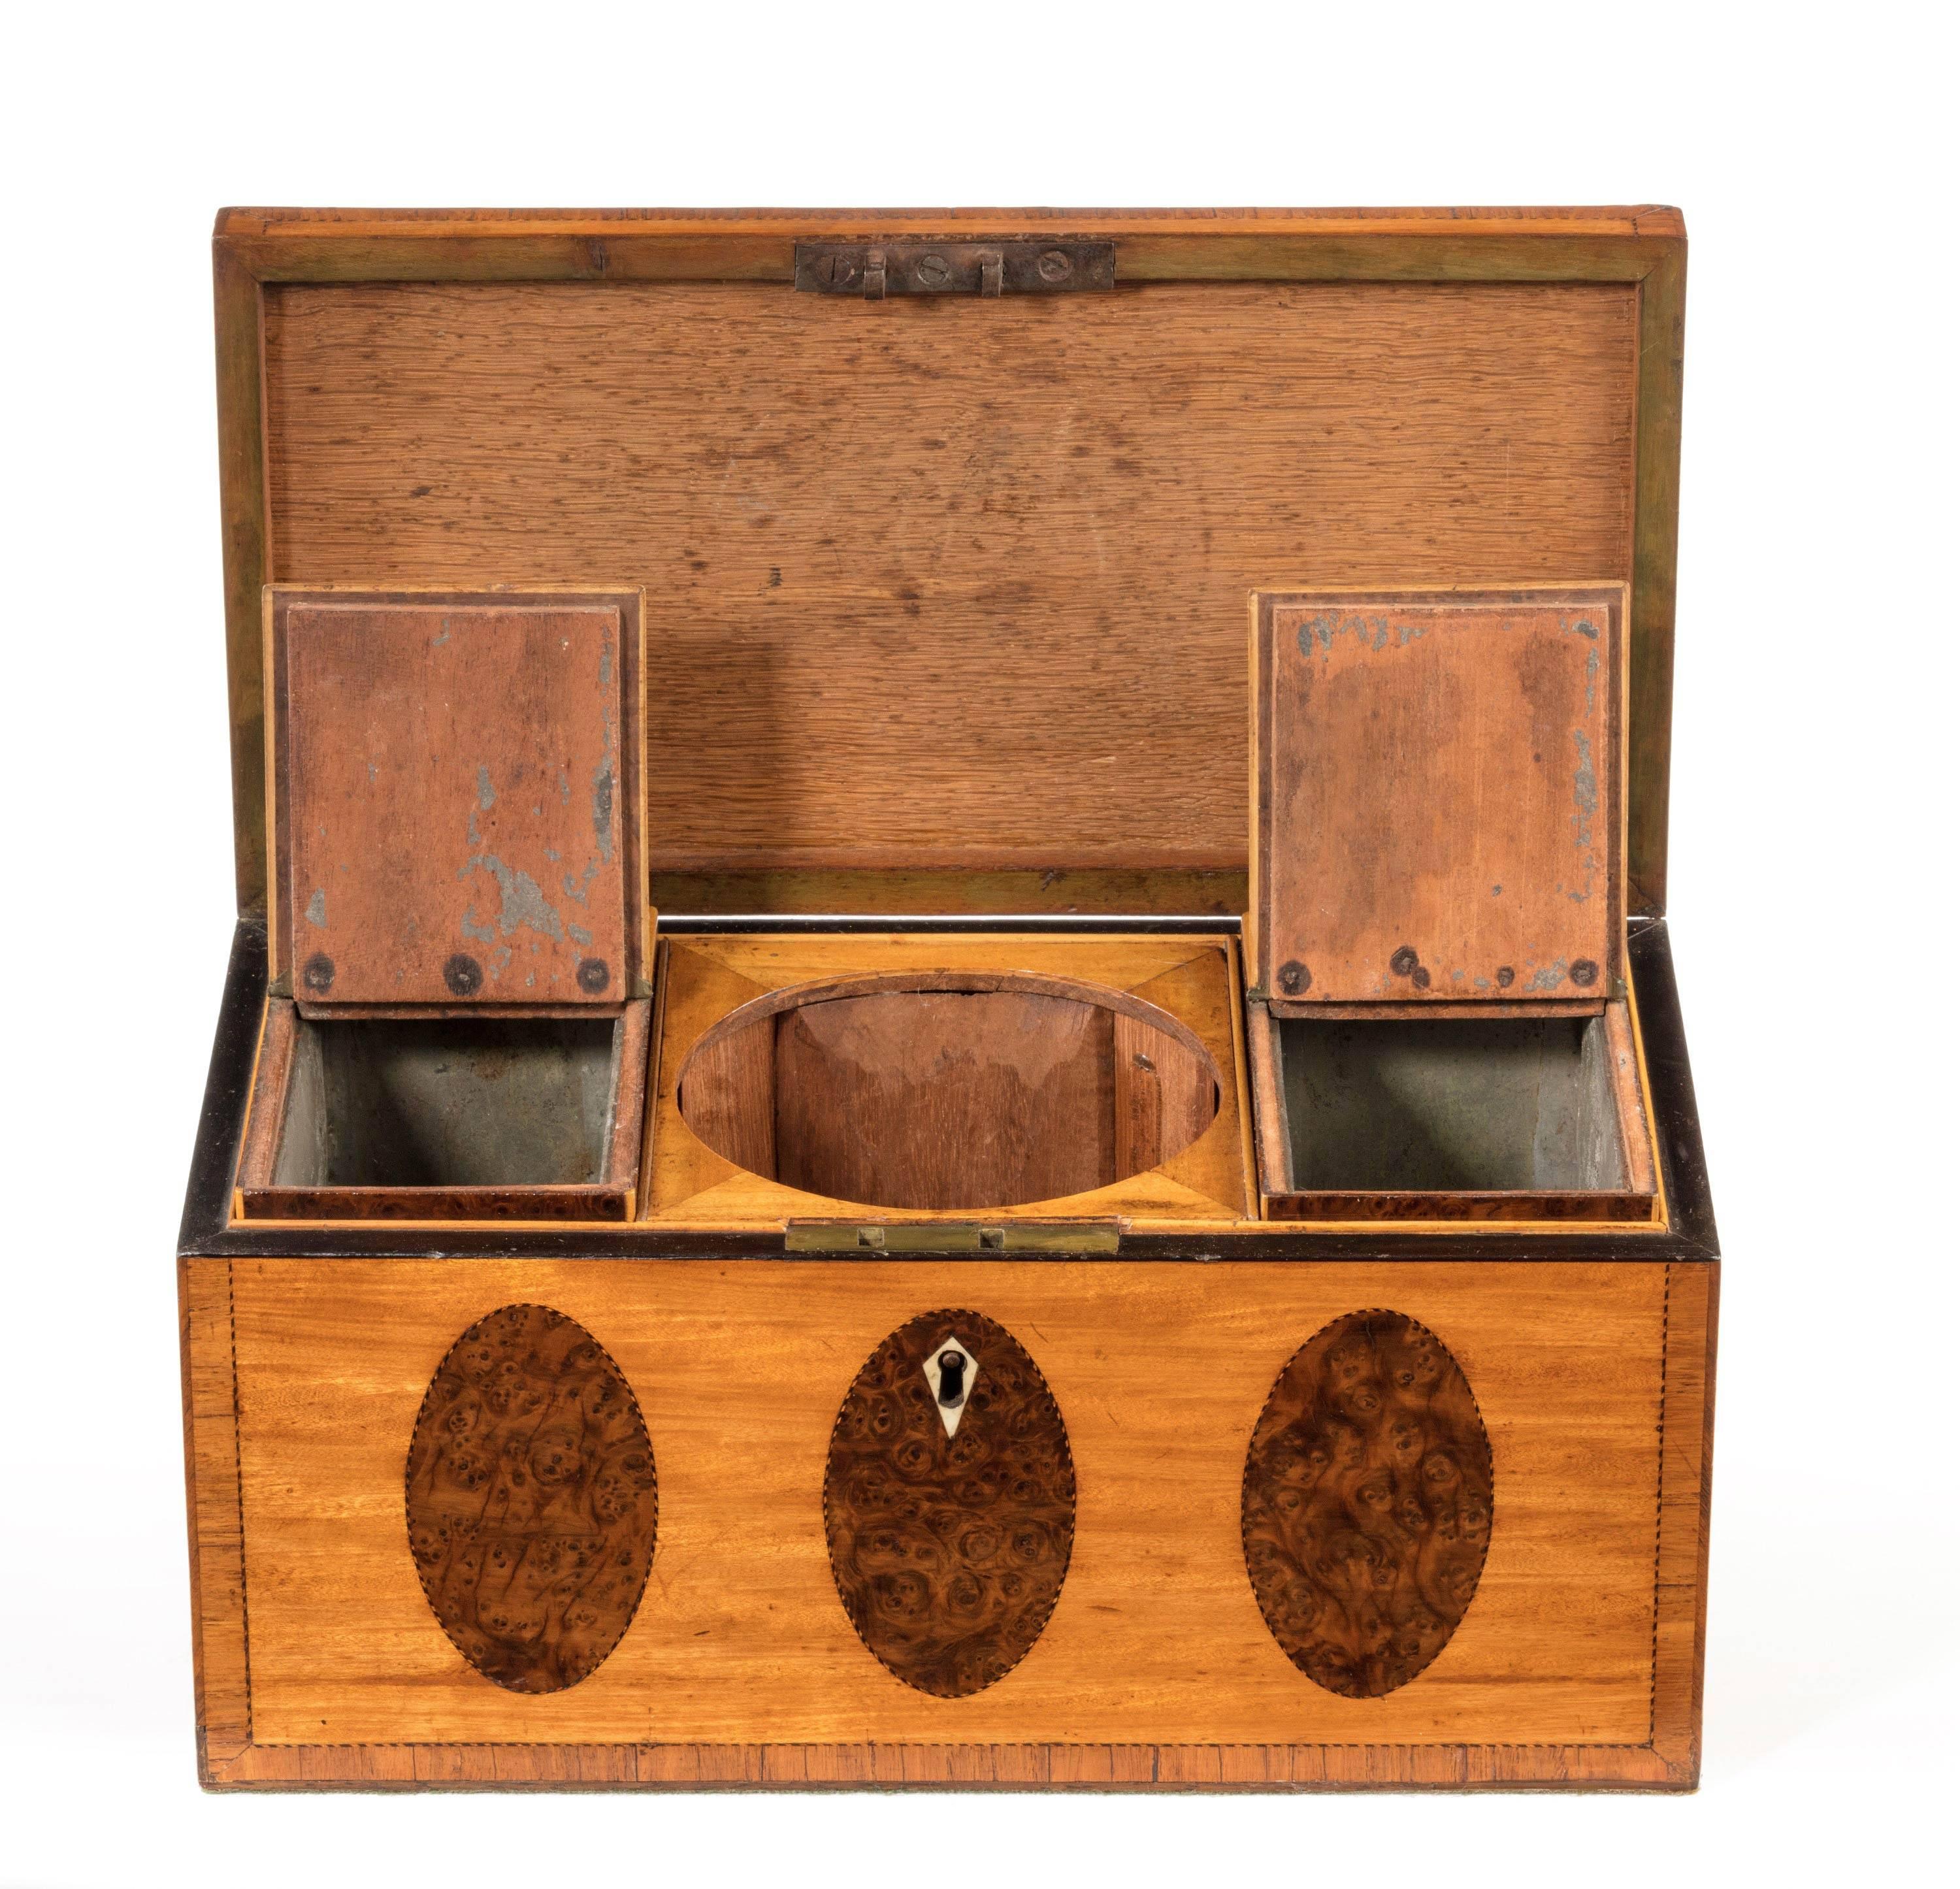 George III Period Satinwood and Burr Yew Tea Caddy In Excellent Condition For Sale In Peterborough, Northamptonshire